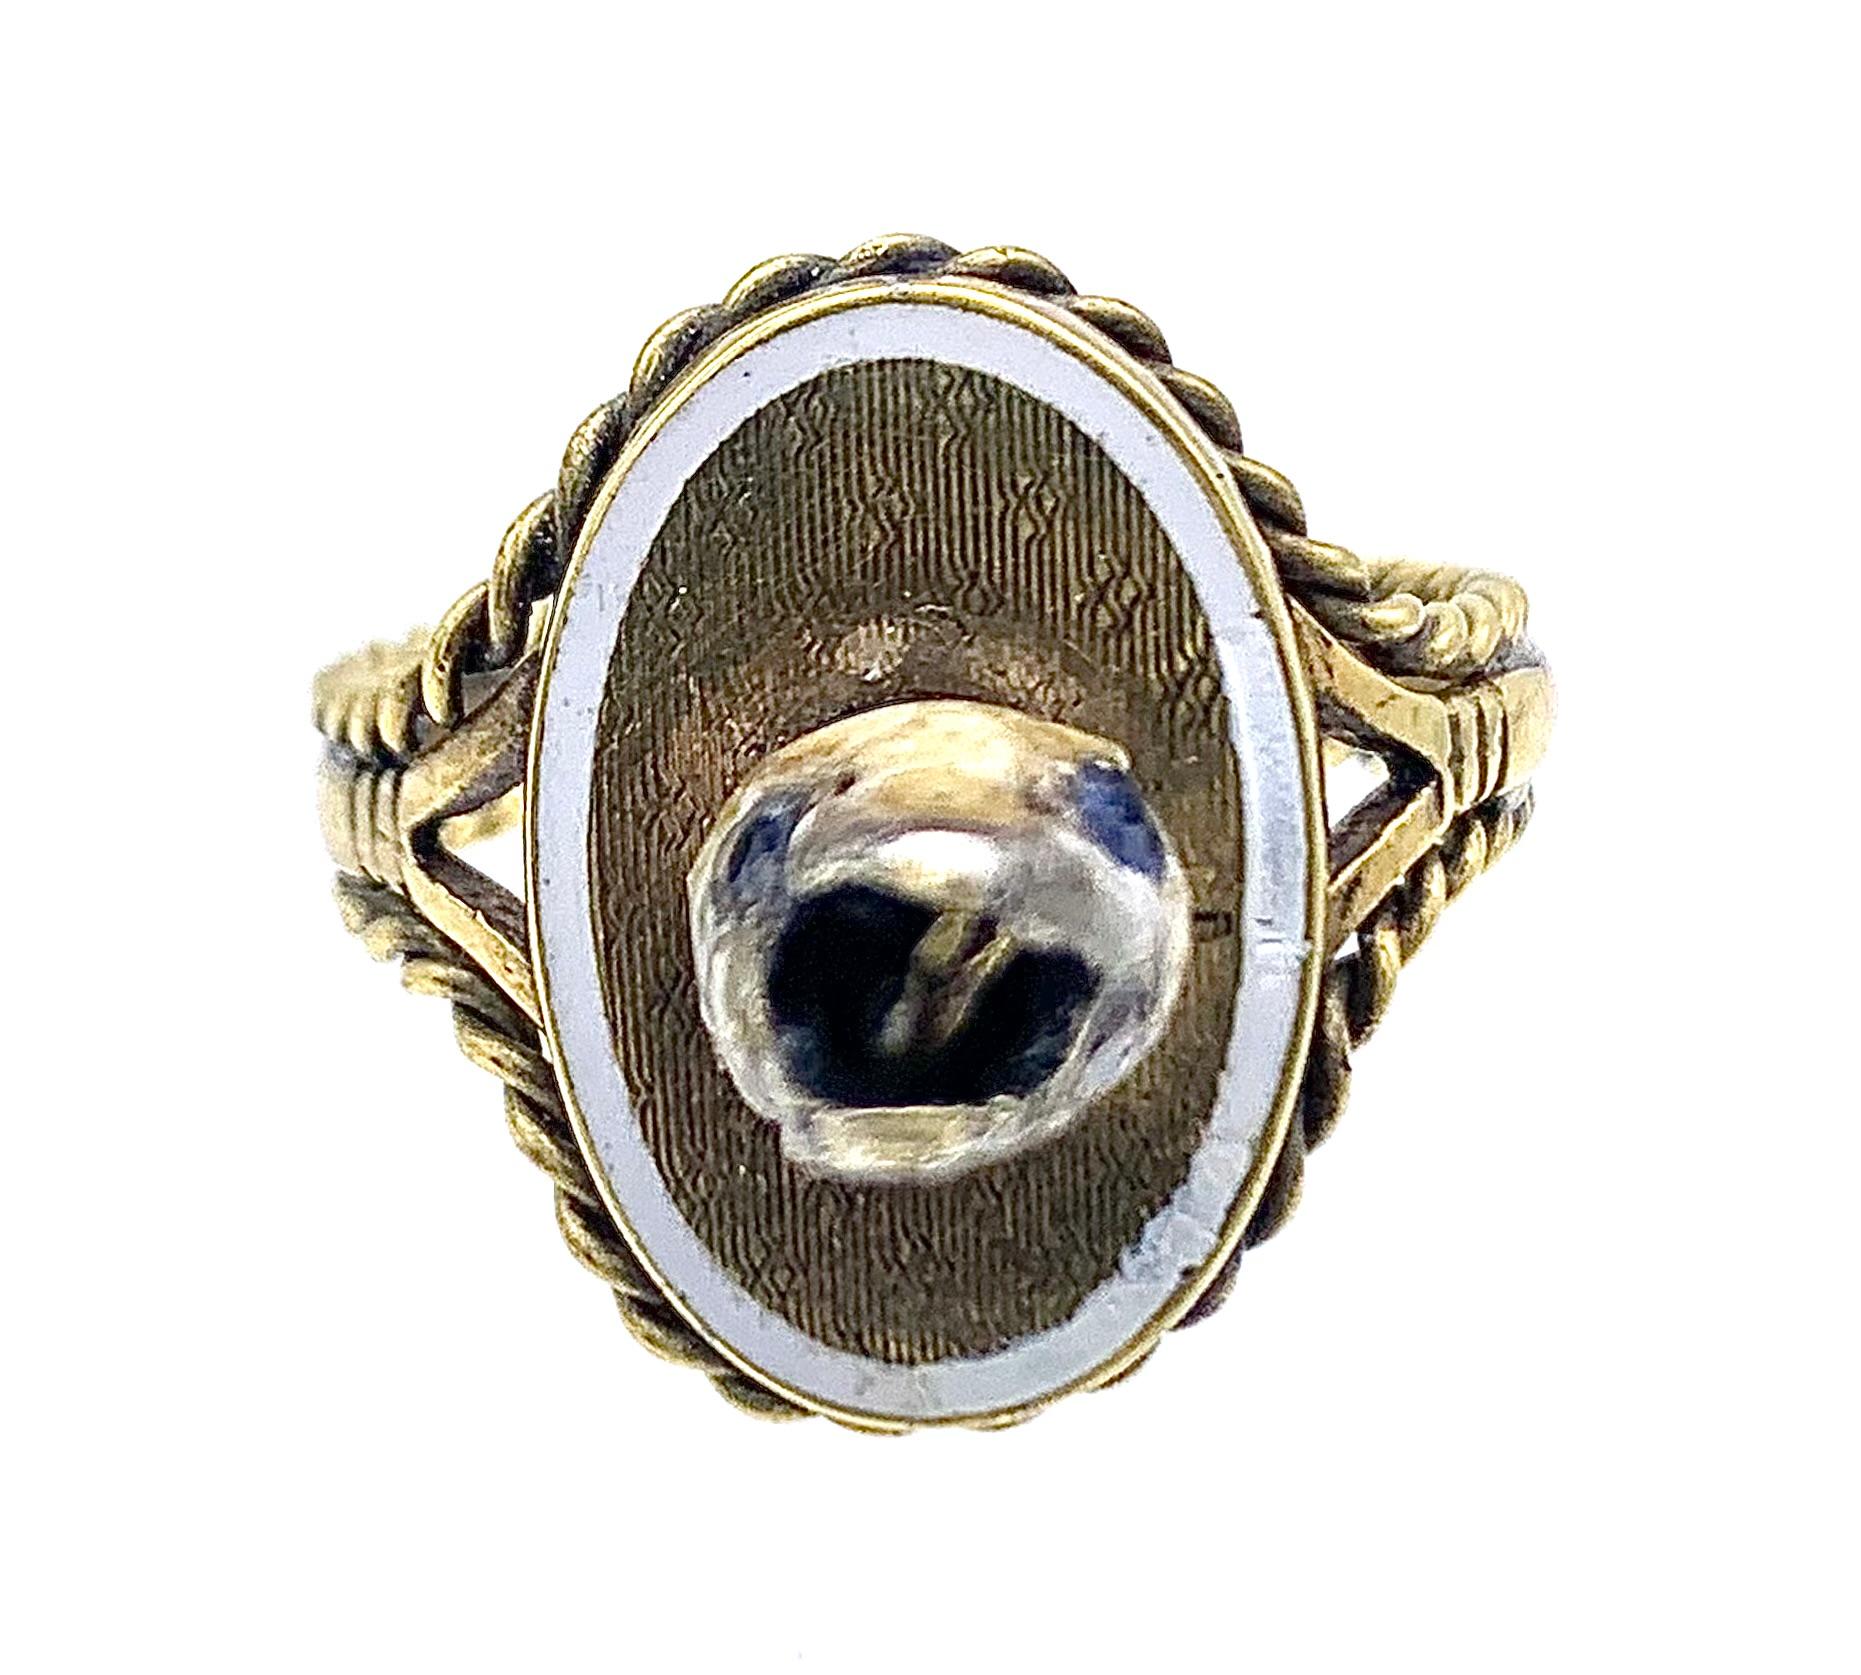 Antique Snake Ring Double Sided Face 10 Karat Gold Sapphire Diamond Eyes Enamel In Good Condition For Sale In Munich, Bavaria